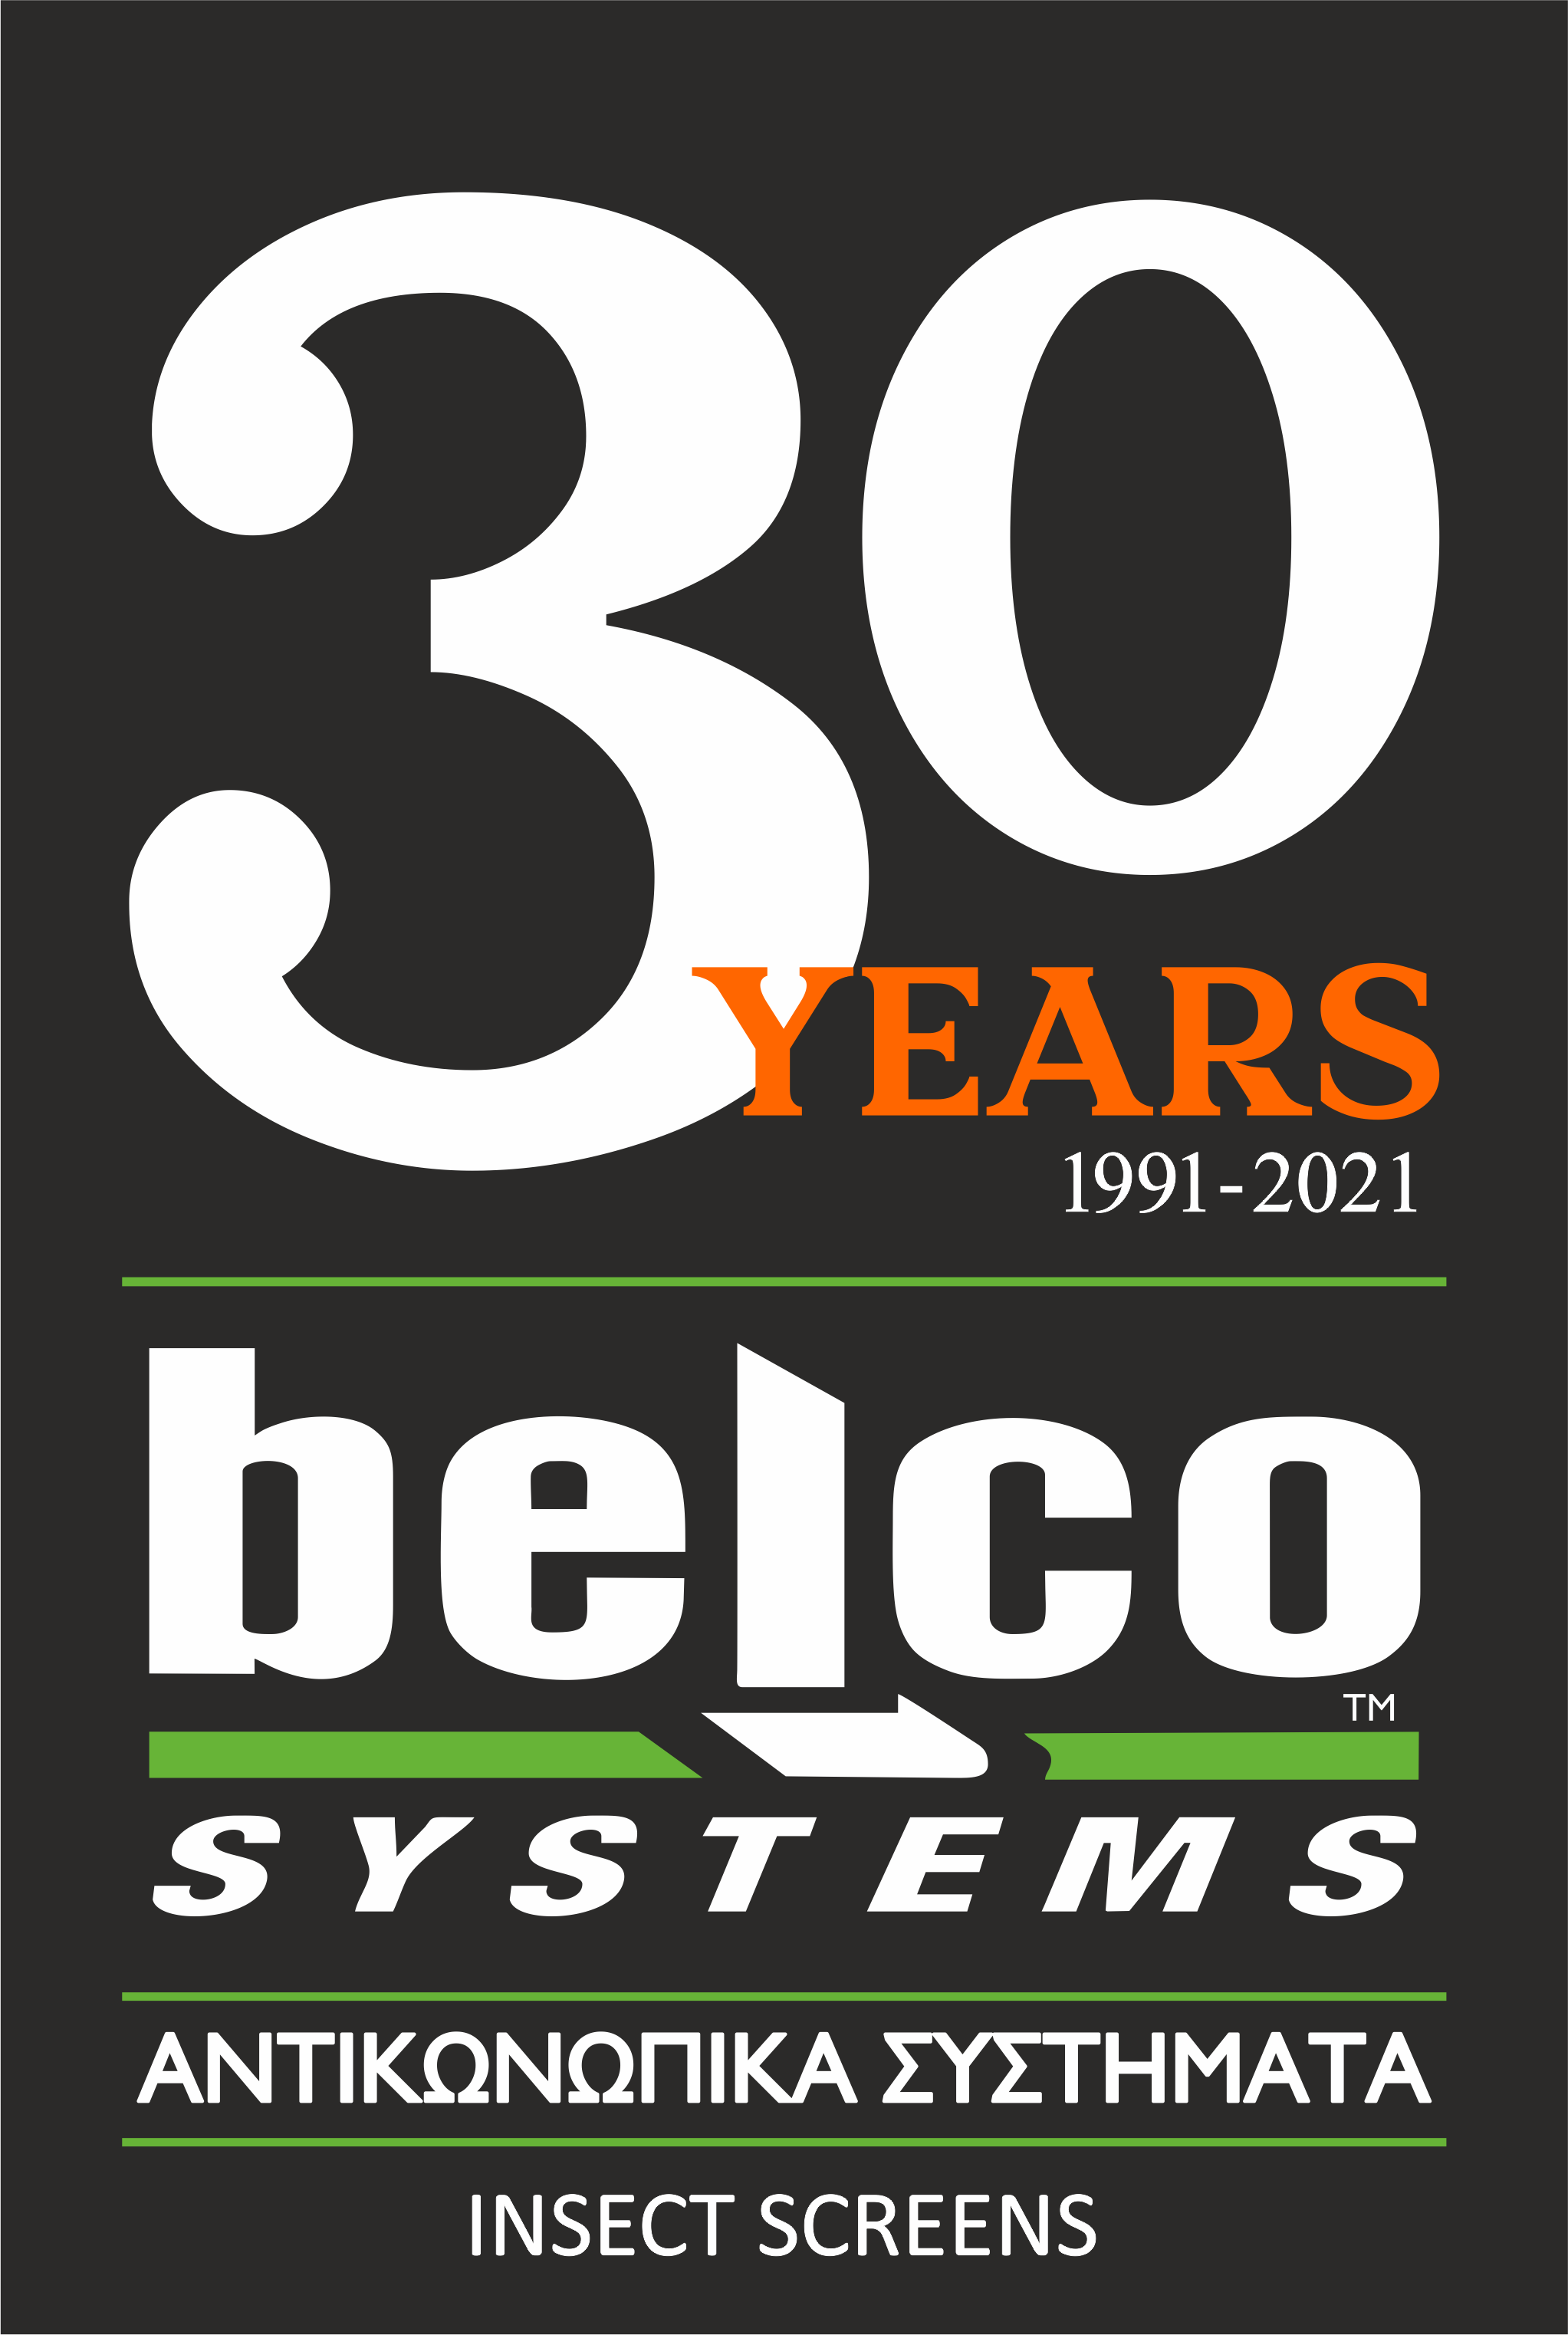 30 years of Belco